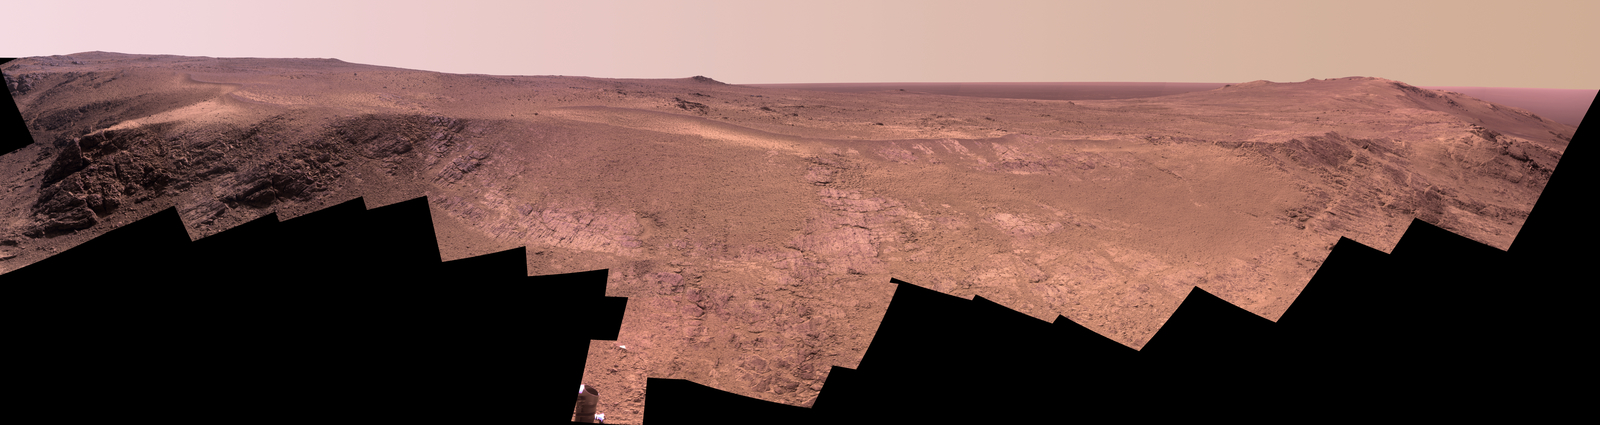 Mars Rover Opportunity's Panorama of 'Rocheport'